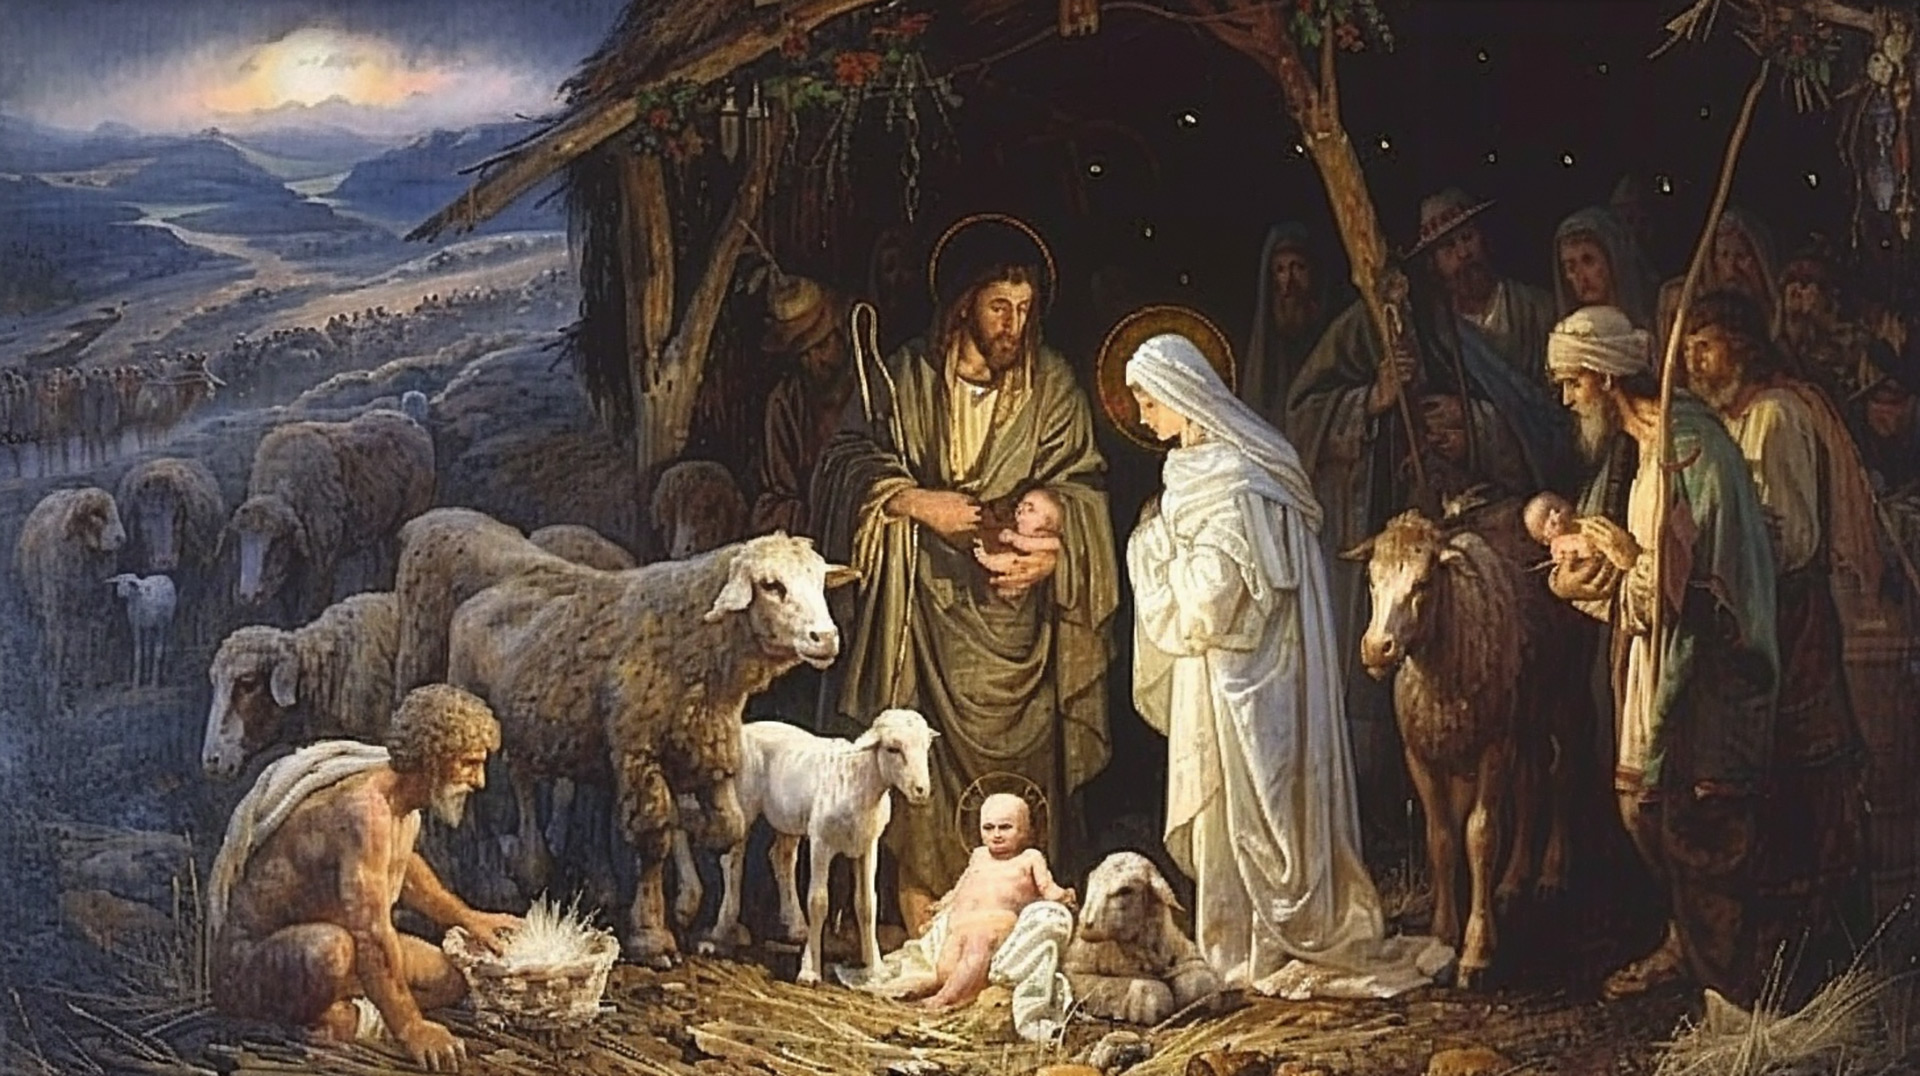 Christmas Blessings: Peaceful Religious Christmas Image